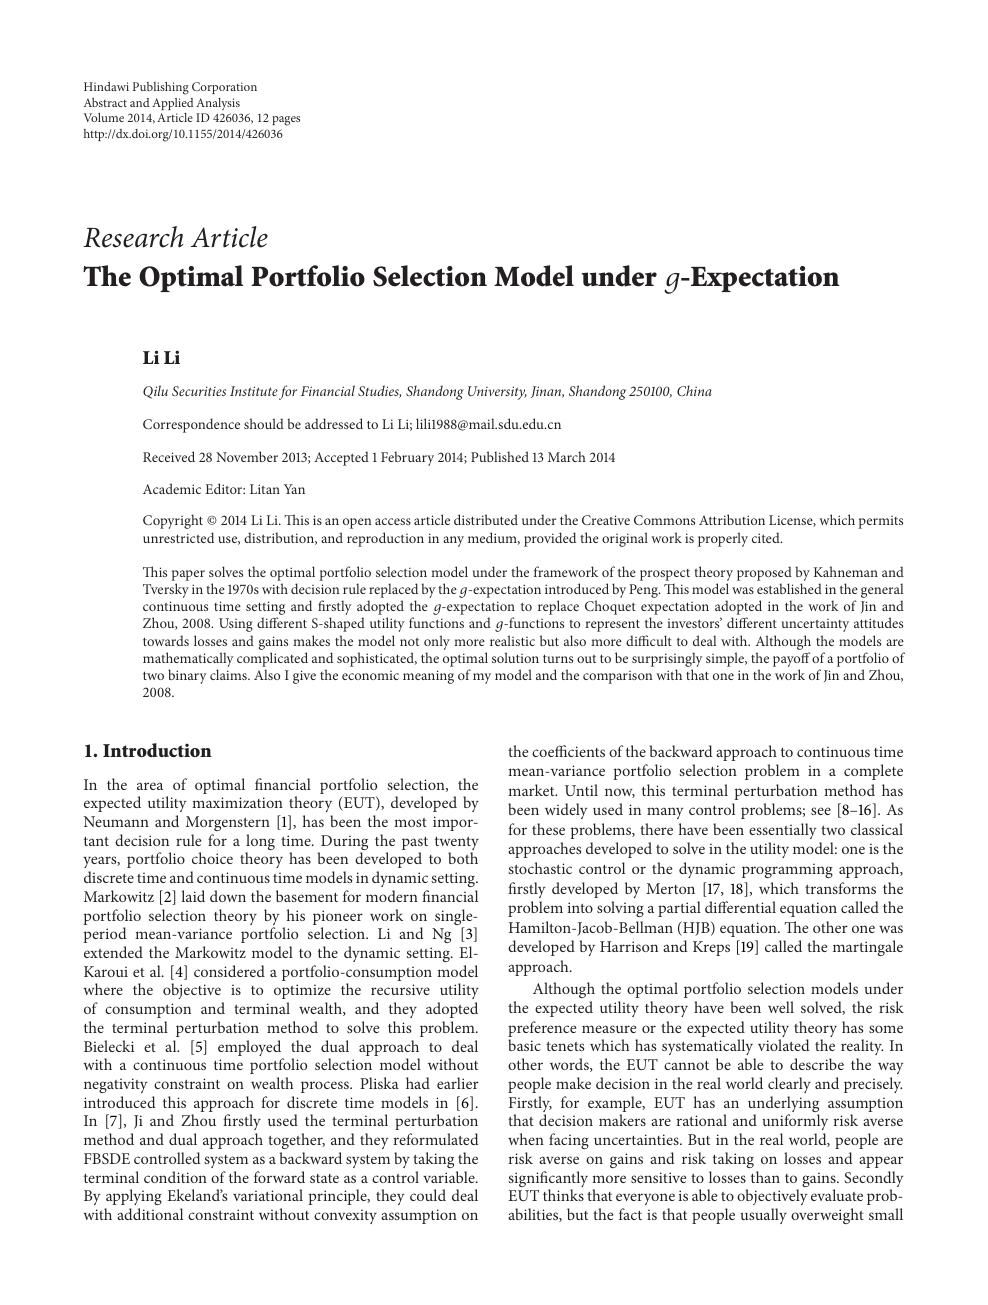 The Optimal Portfolio Selection Model Under Expectation Topic Of Research Paper In Mathematics Download Scholarly Article Pdf And Read For Free On Cyberleninka Open Science Hub